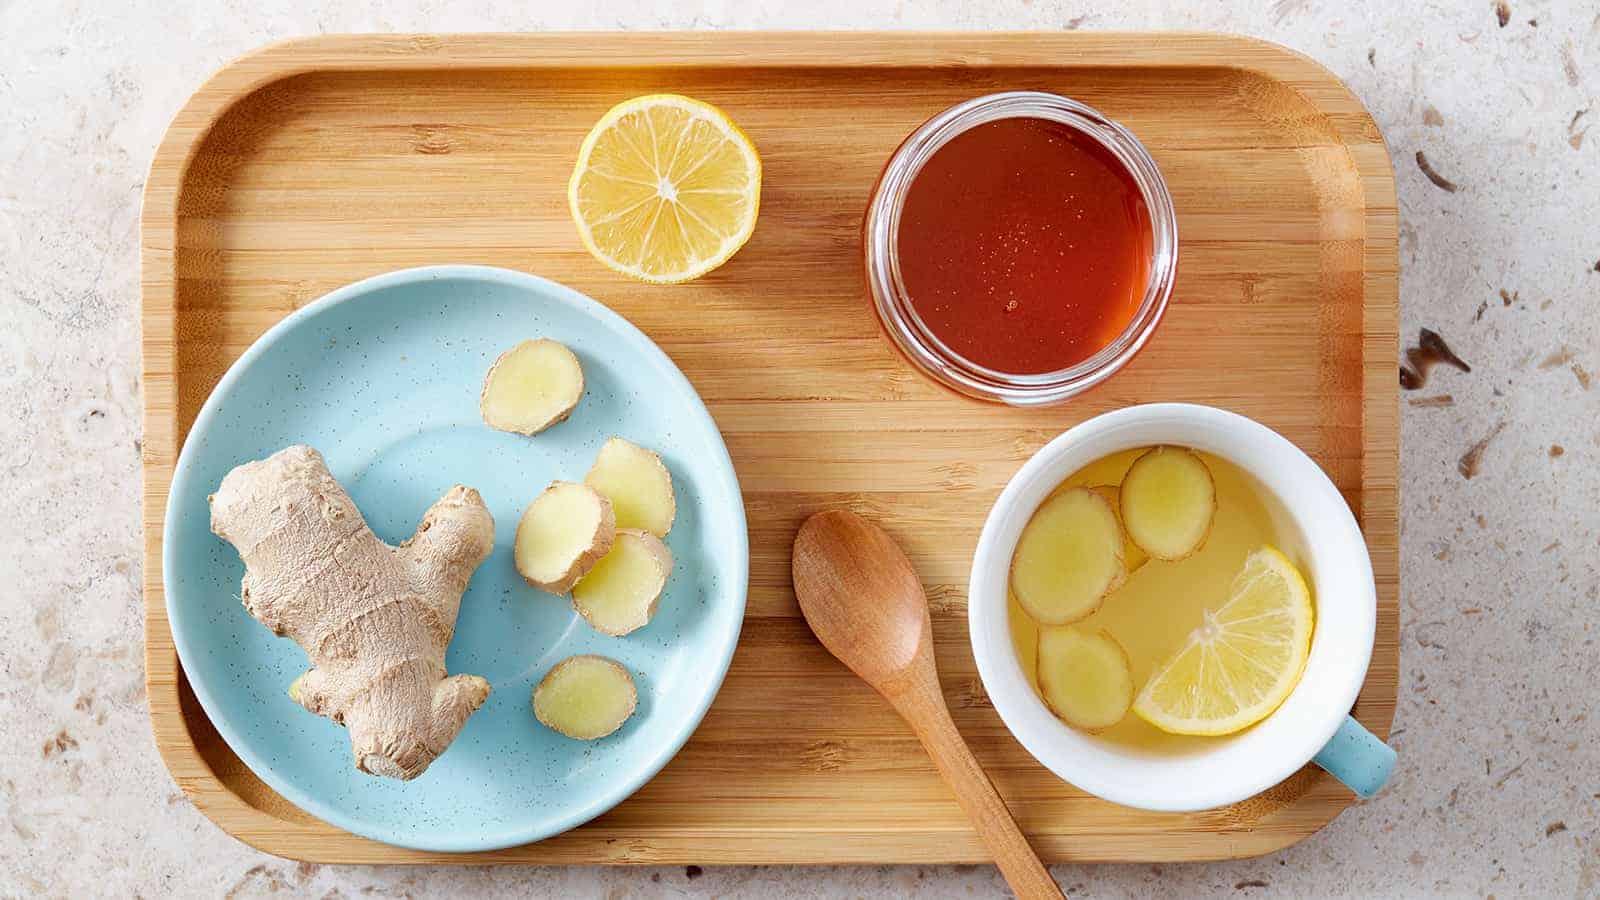 How to Make Honey Ginger Tea to Soothe Coughing